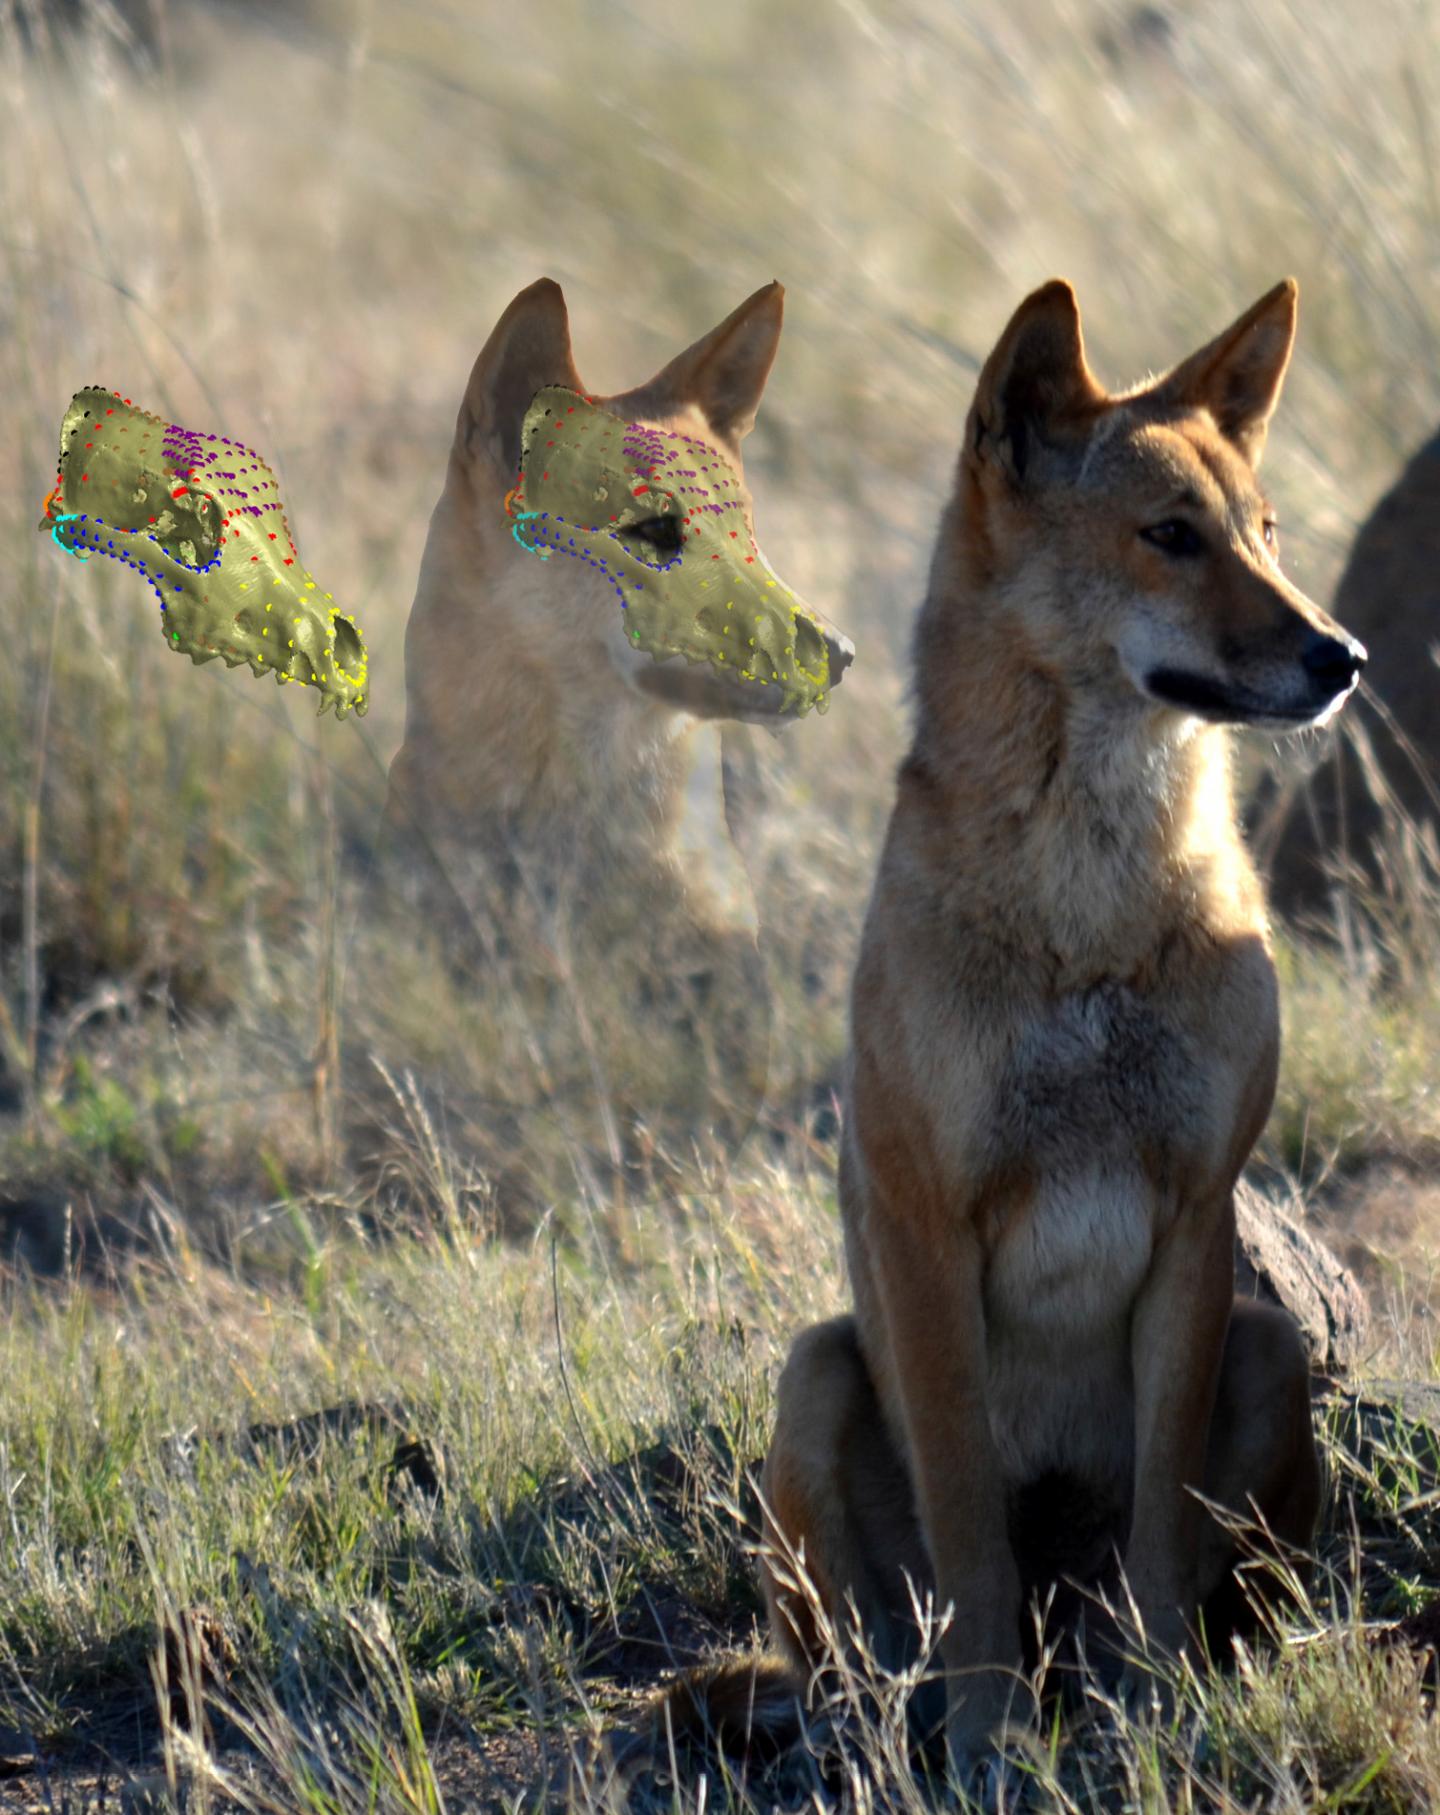 Dingo Skull Resistant to Change from Cross Breeding with Dogs, Research Shows (1/3)